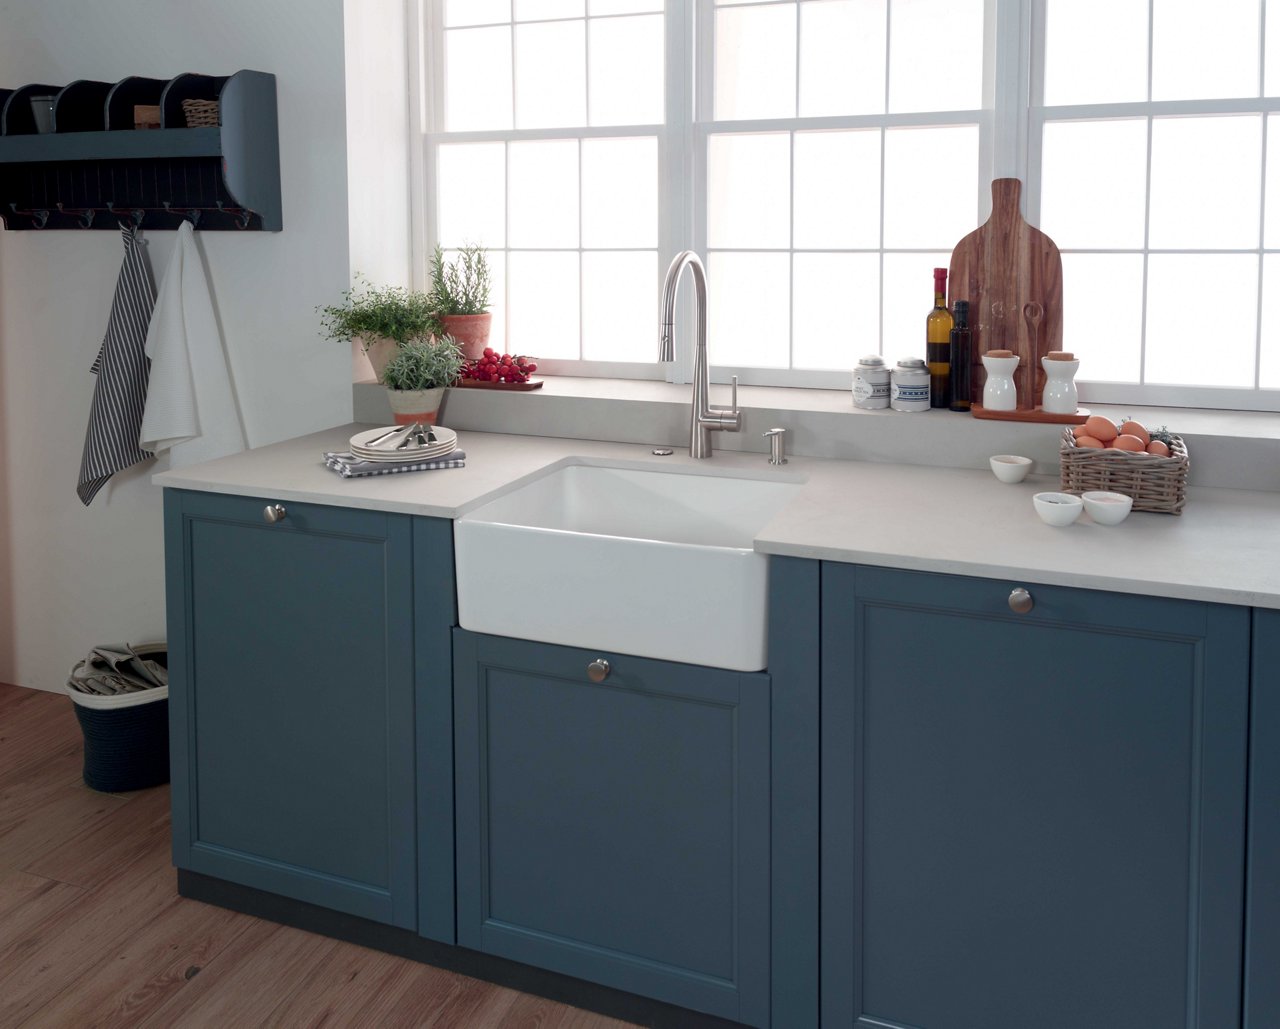 White apron front sink in farmhouse kitchen with blue cabinets